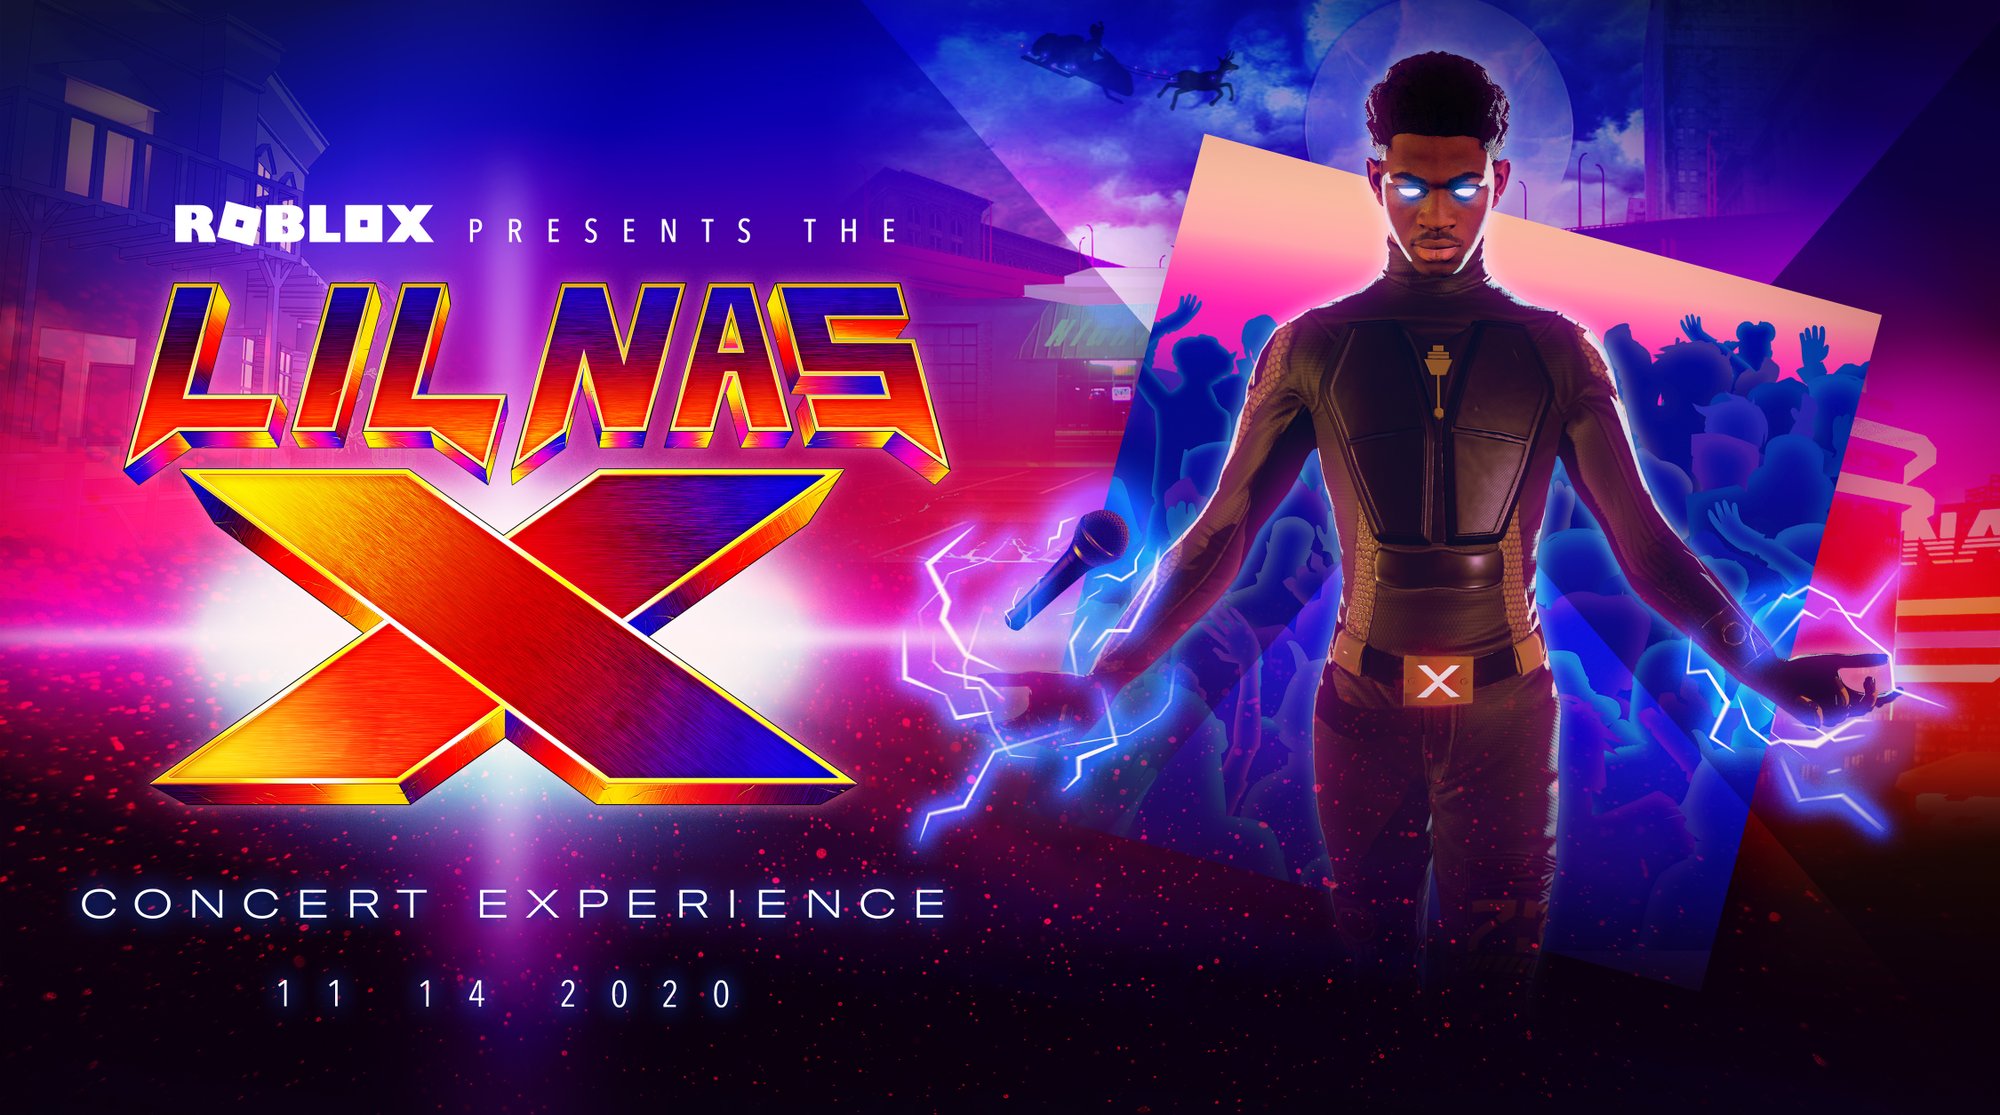 Roblox And Two Time Grammy Award Winner Lil Nas X Unite For Groundbreaking First Ever Virtual Concert On The Platform - roblox press release